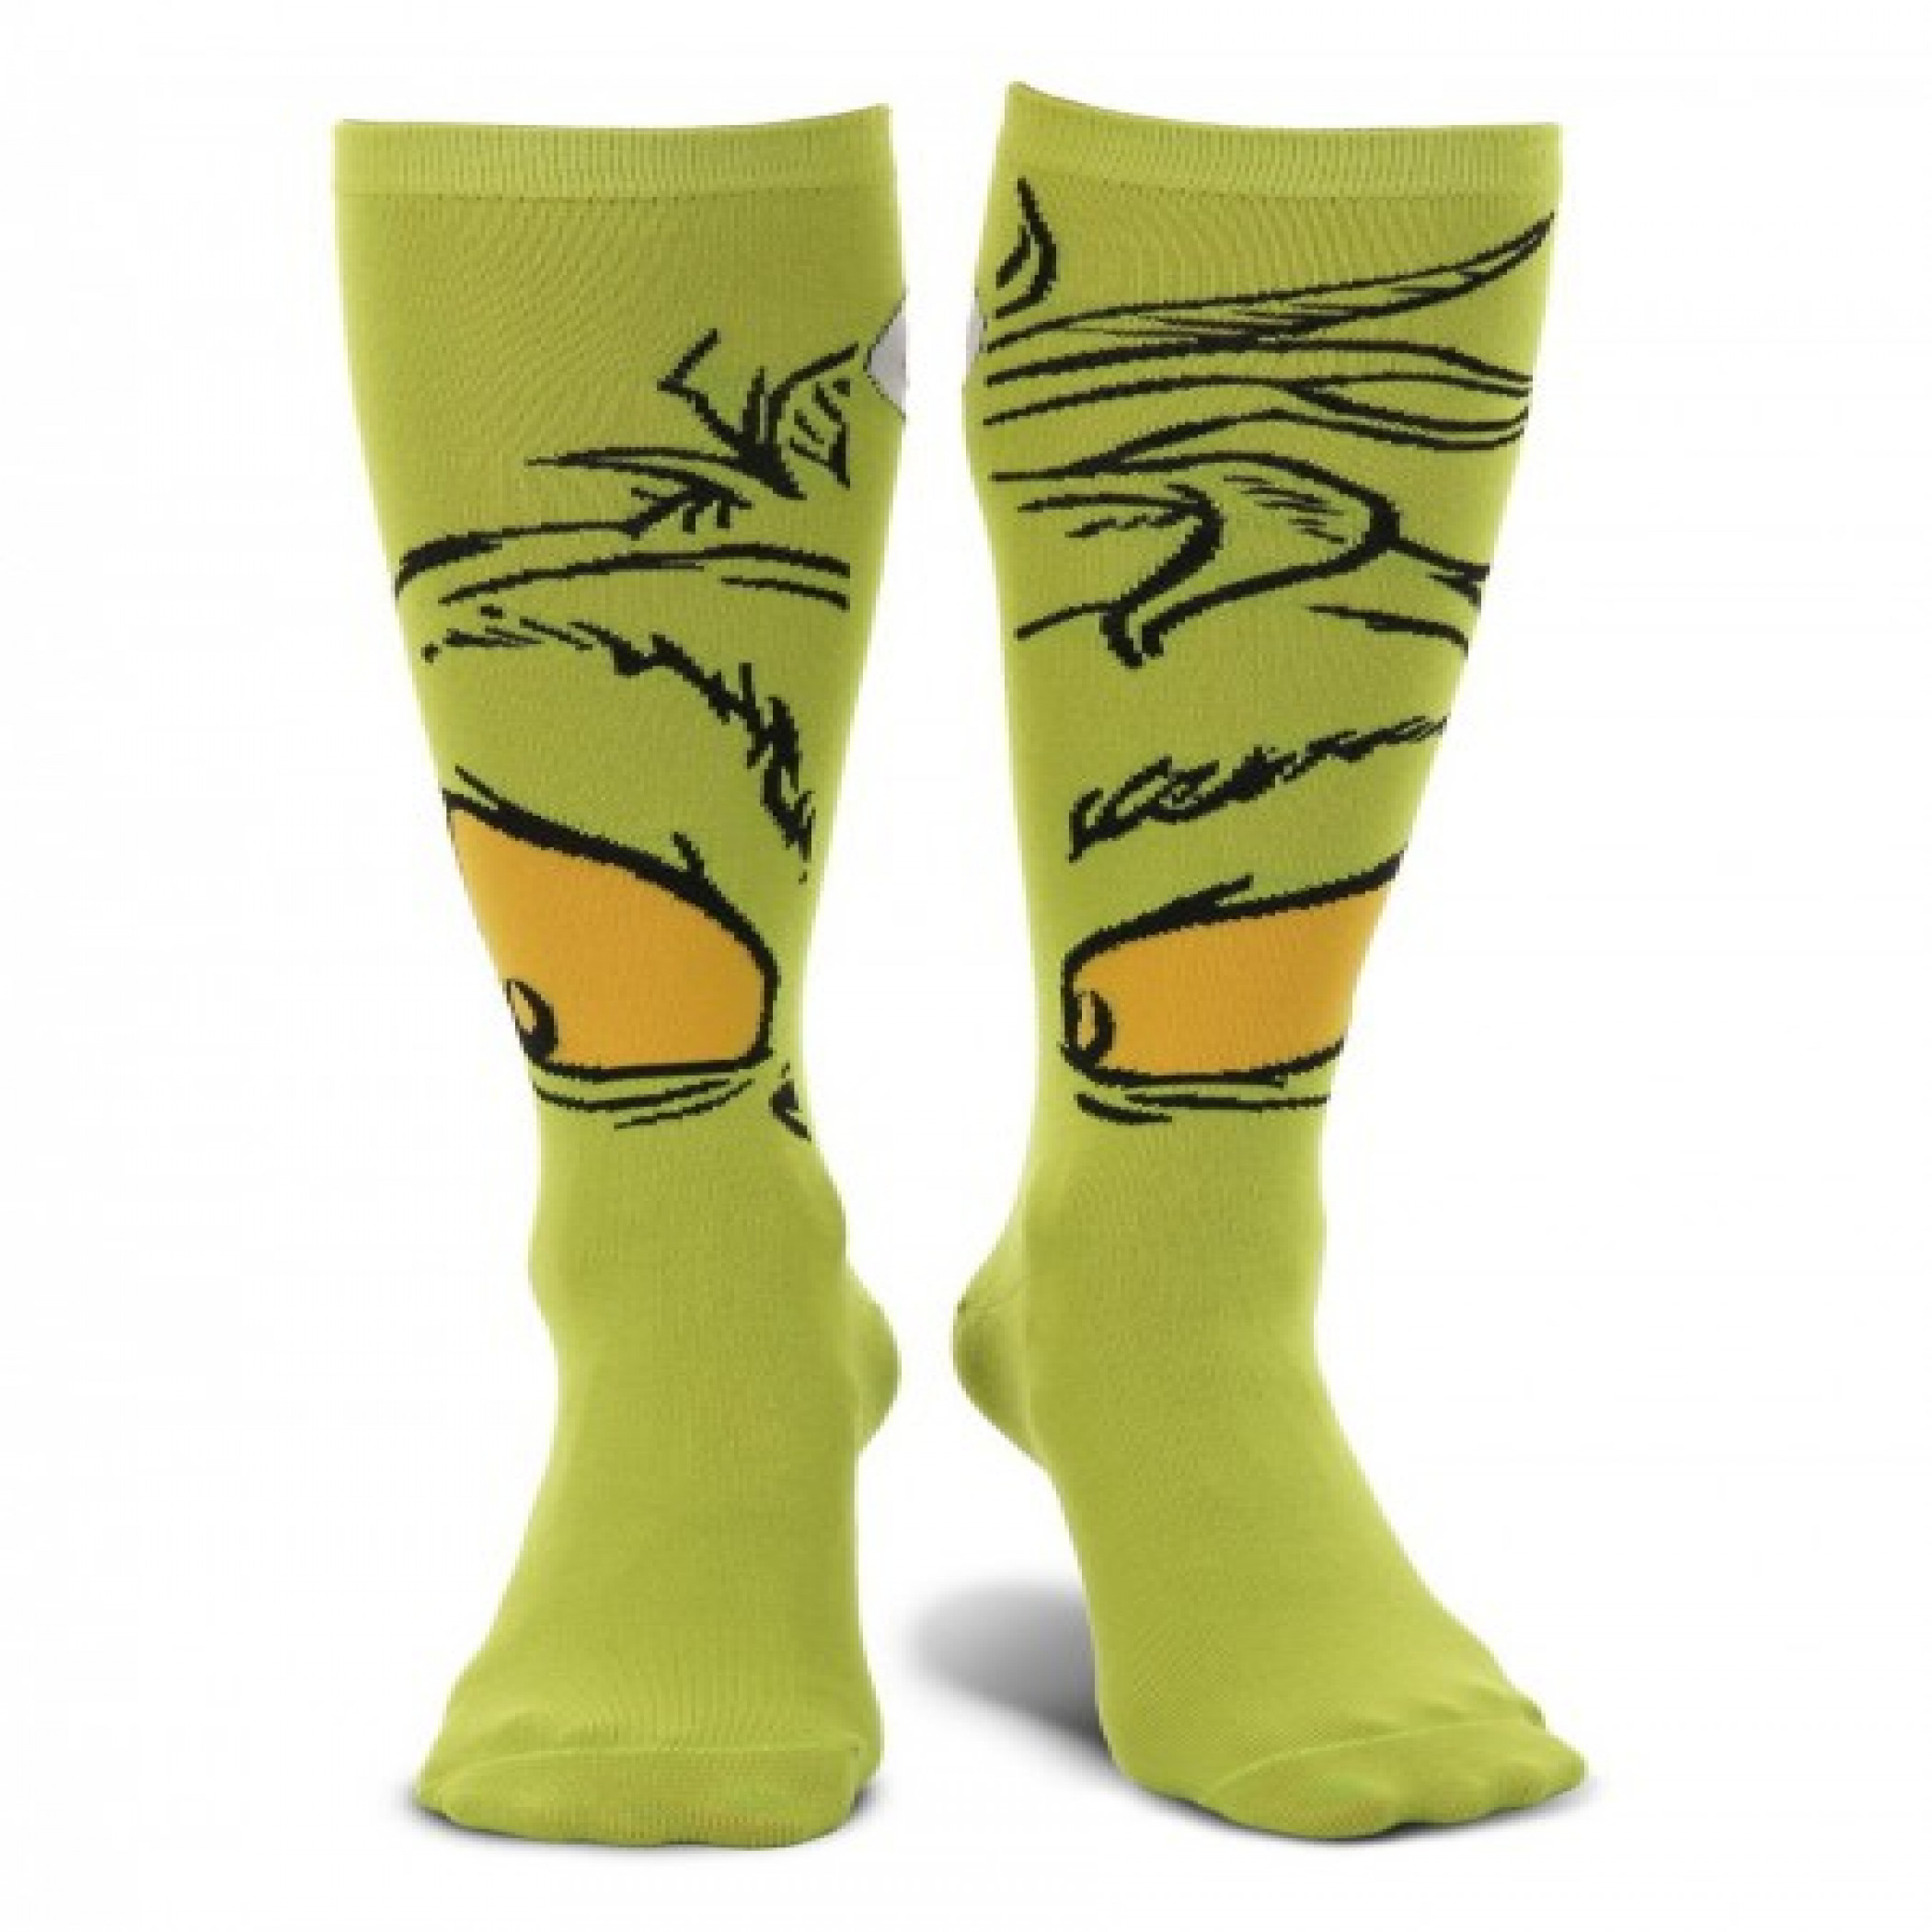 Dr. Seuss The Grinch Who Stole Christmas Character Knee High Socks